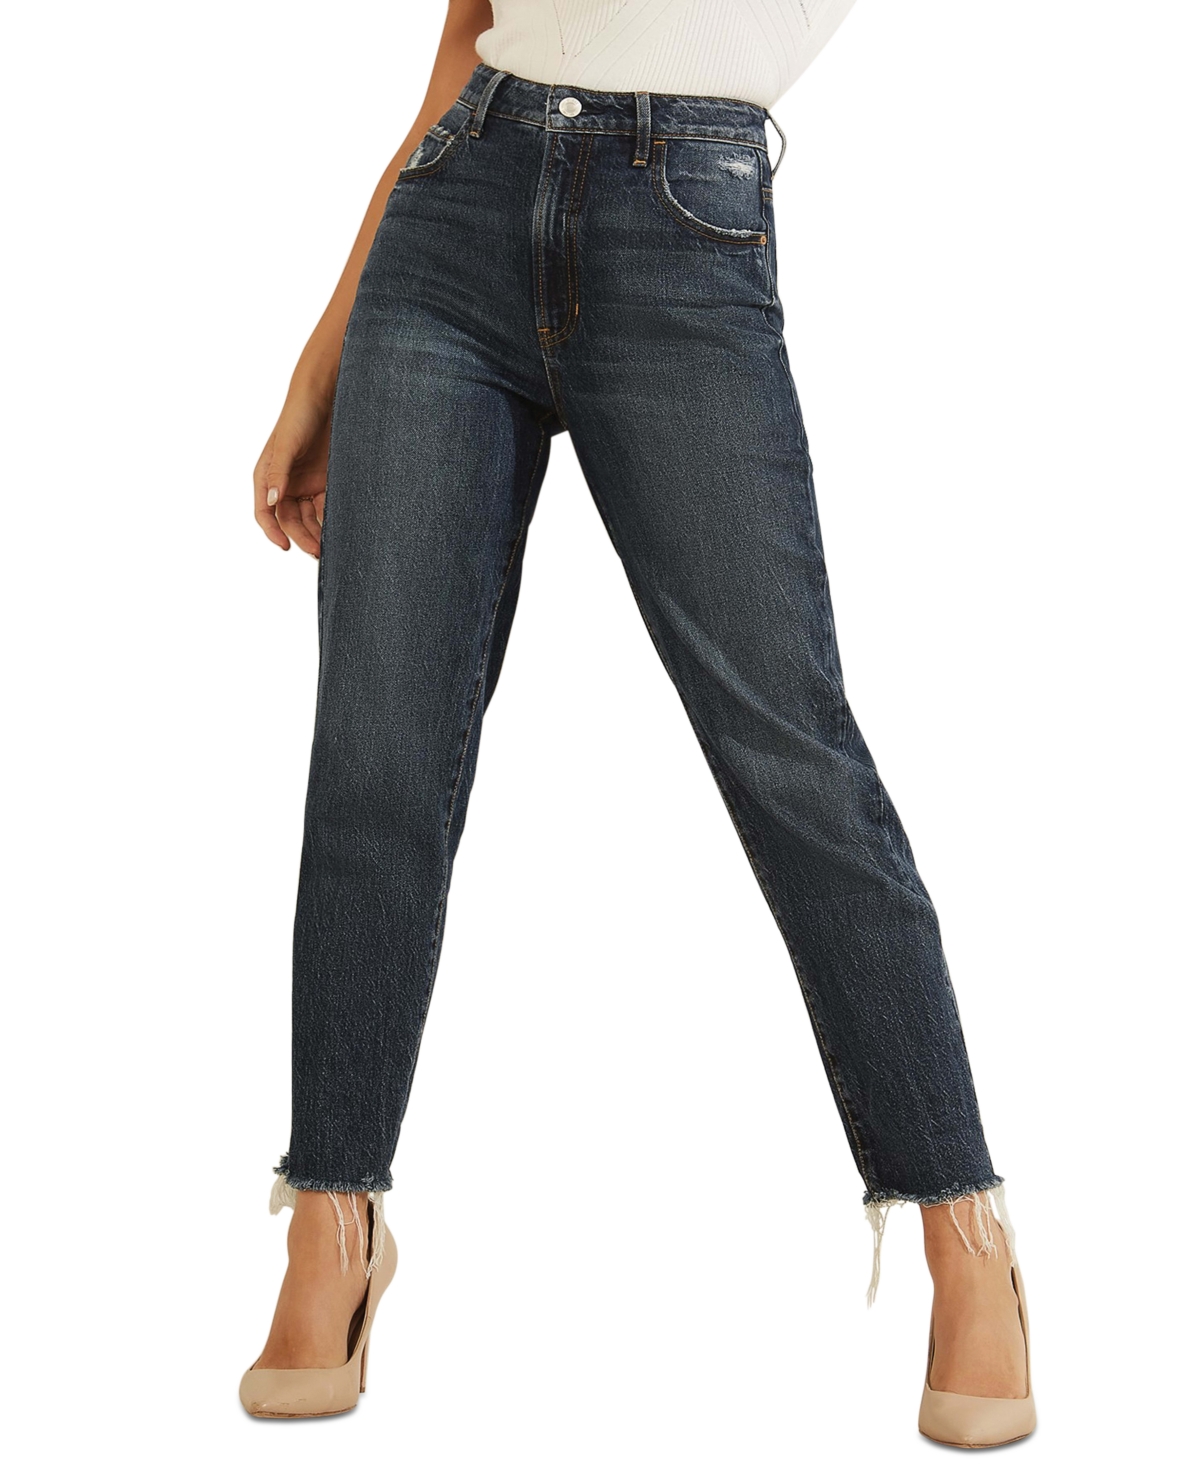  Guess Women's Frayed Mom Jeans